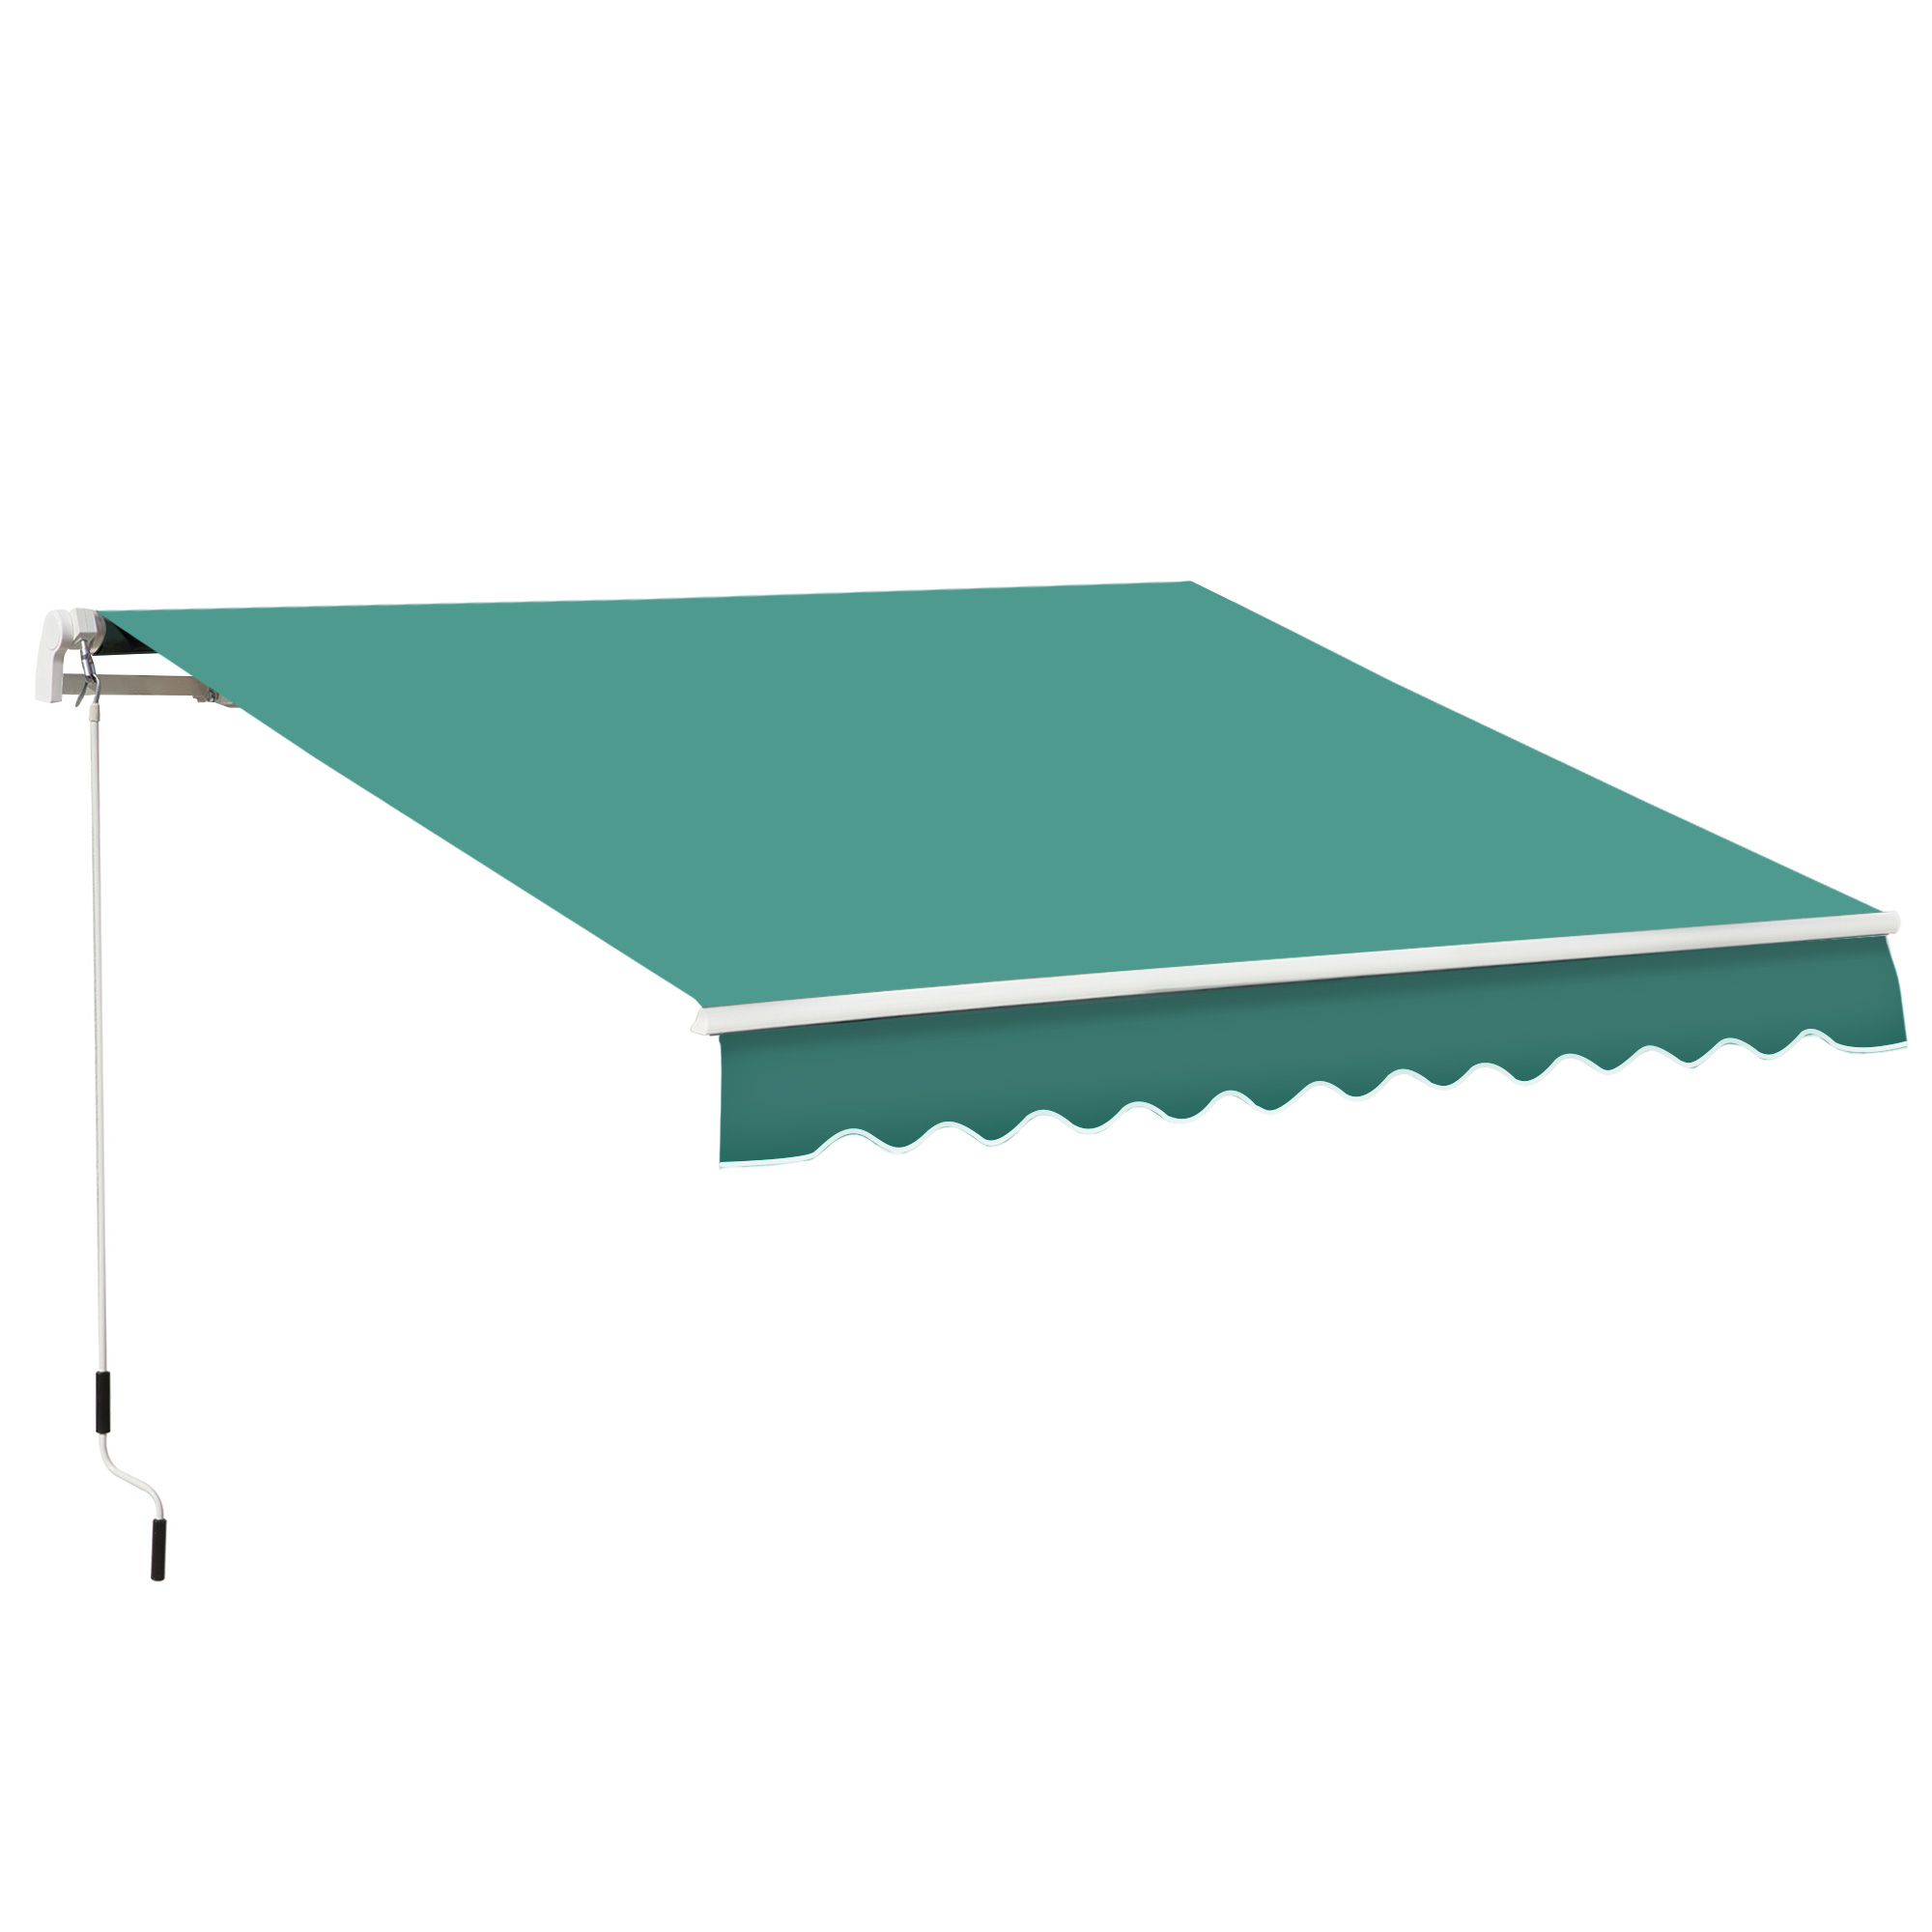 Outsunny 13' x 8' Green Manually Retractable Patio Awning - image 1 of 9